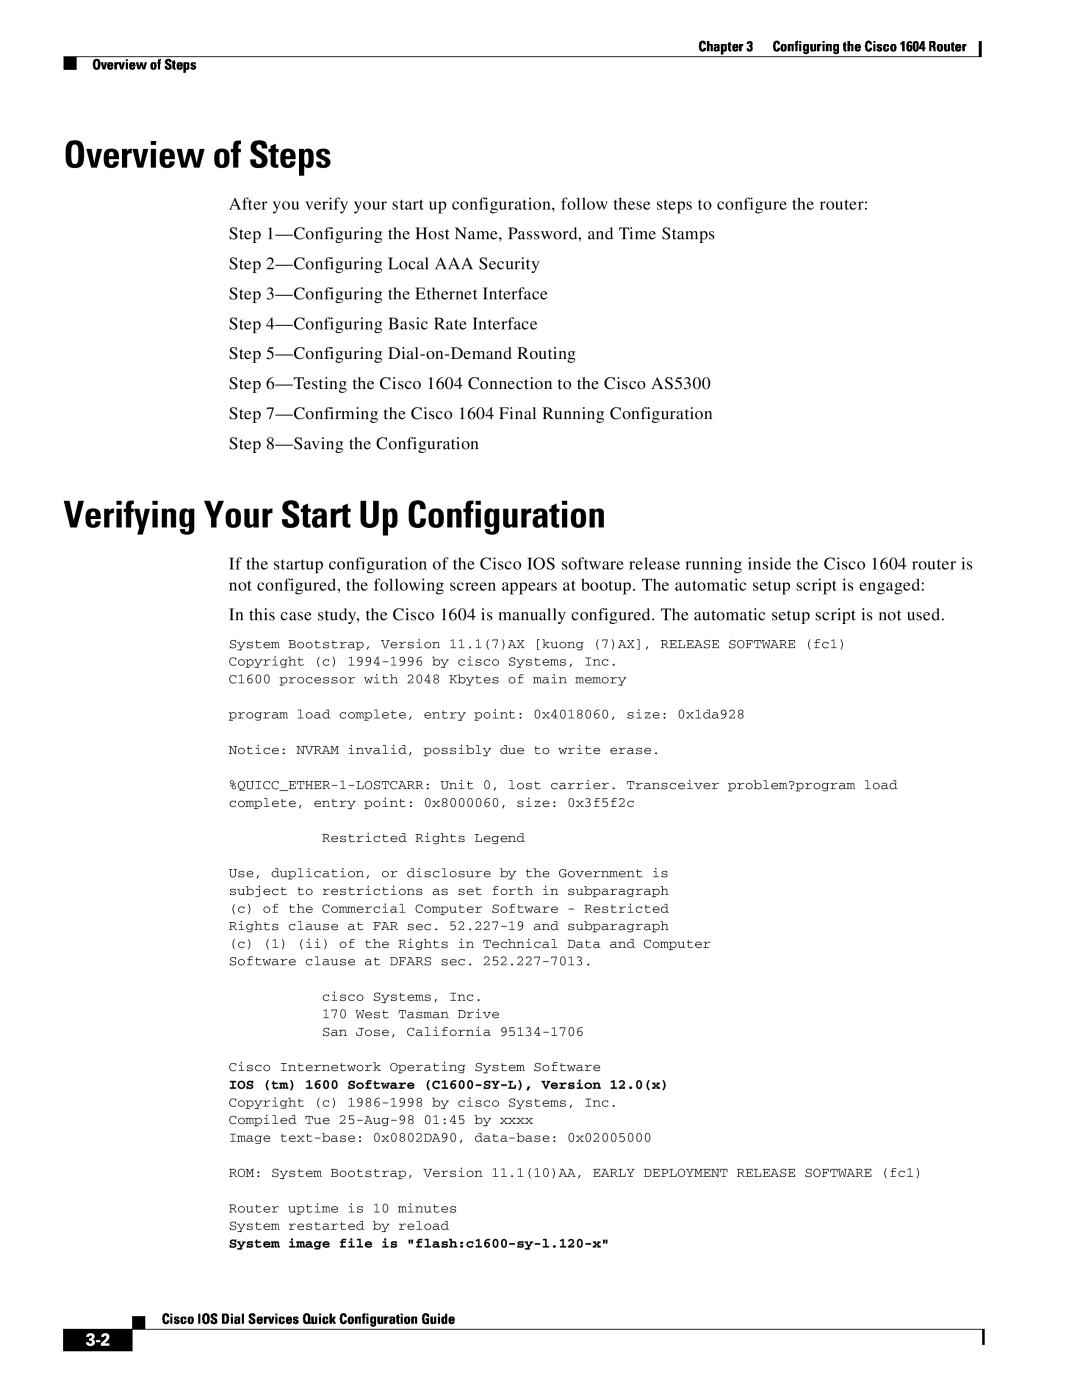 Cisco Systems 1604 manual Overview of Steps, Verifying Your Start Up Configuration 